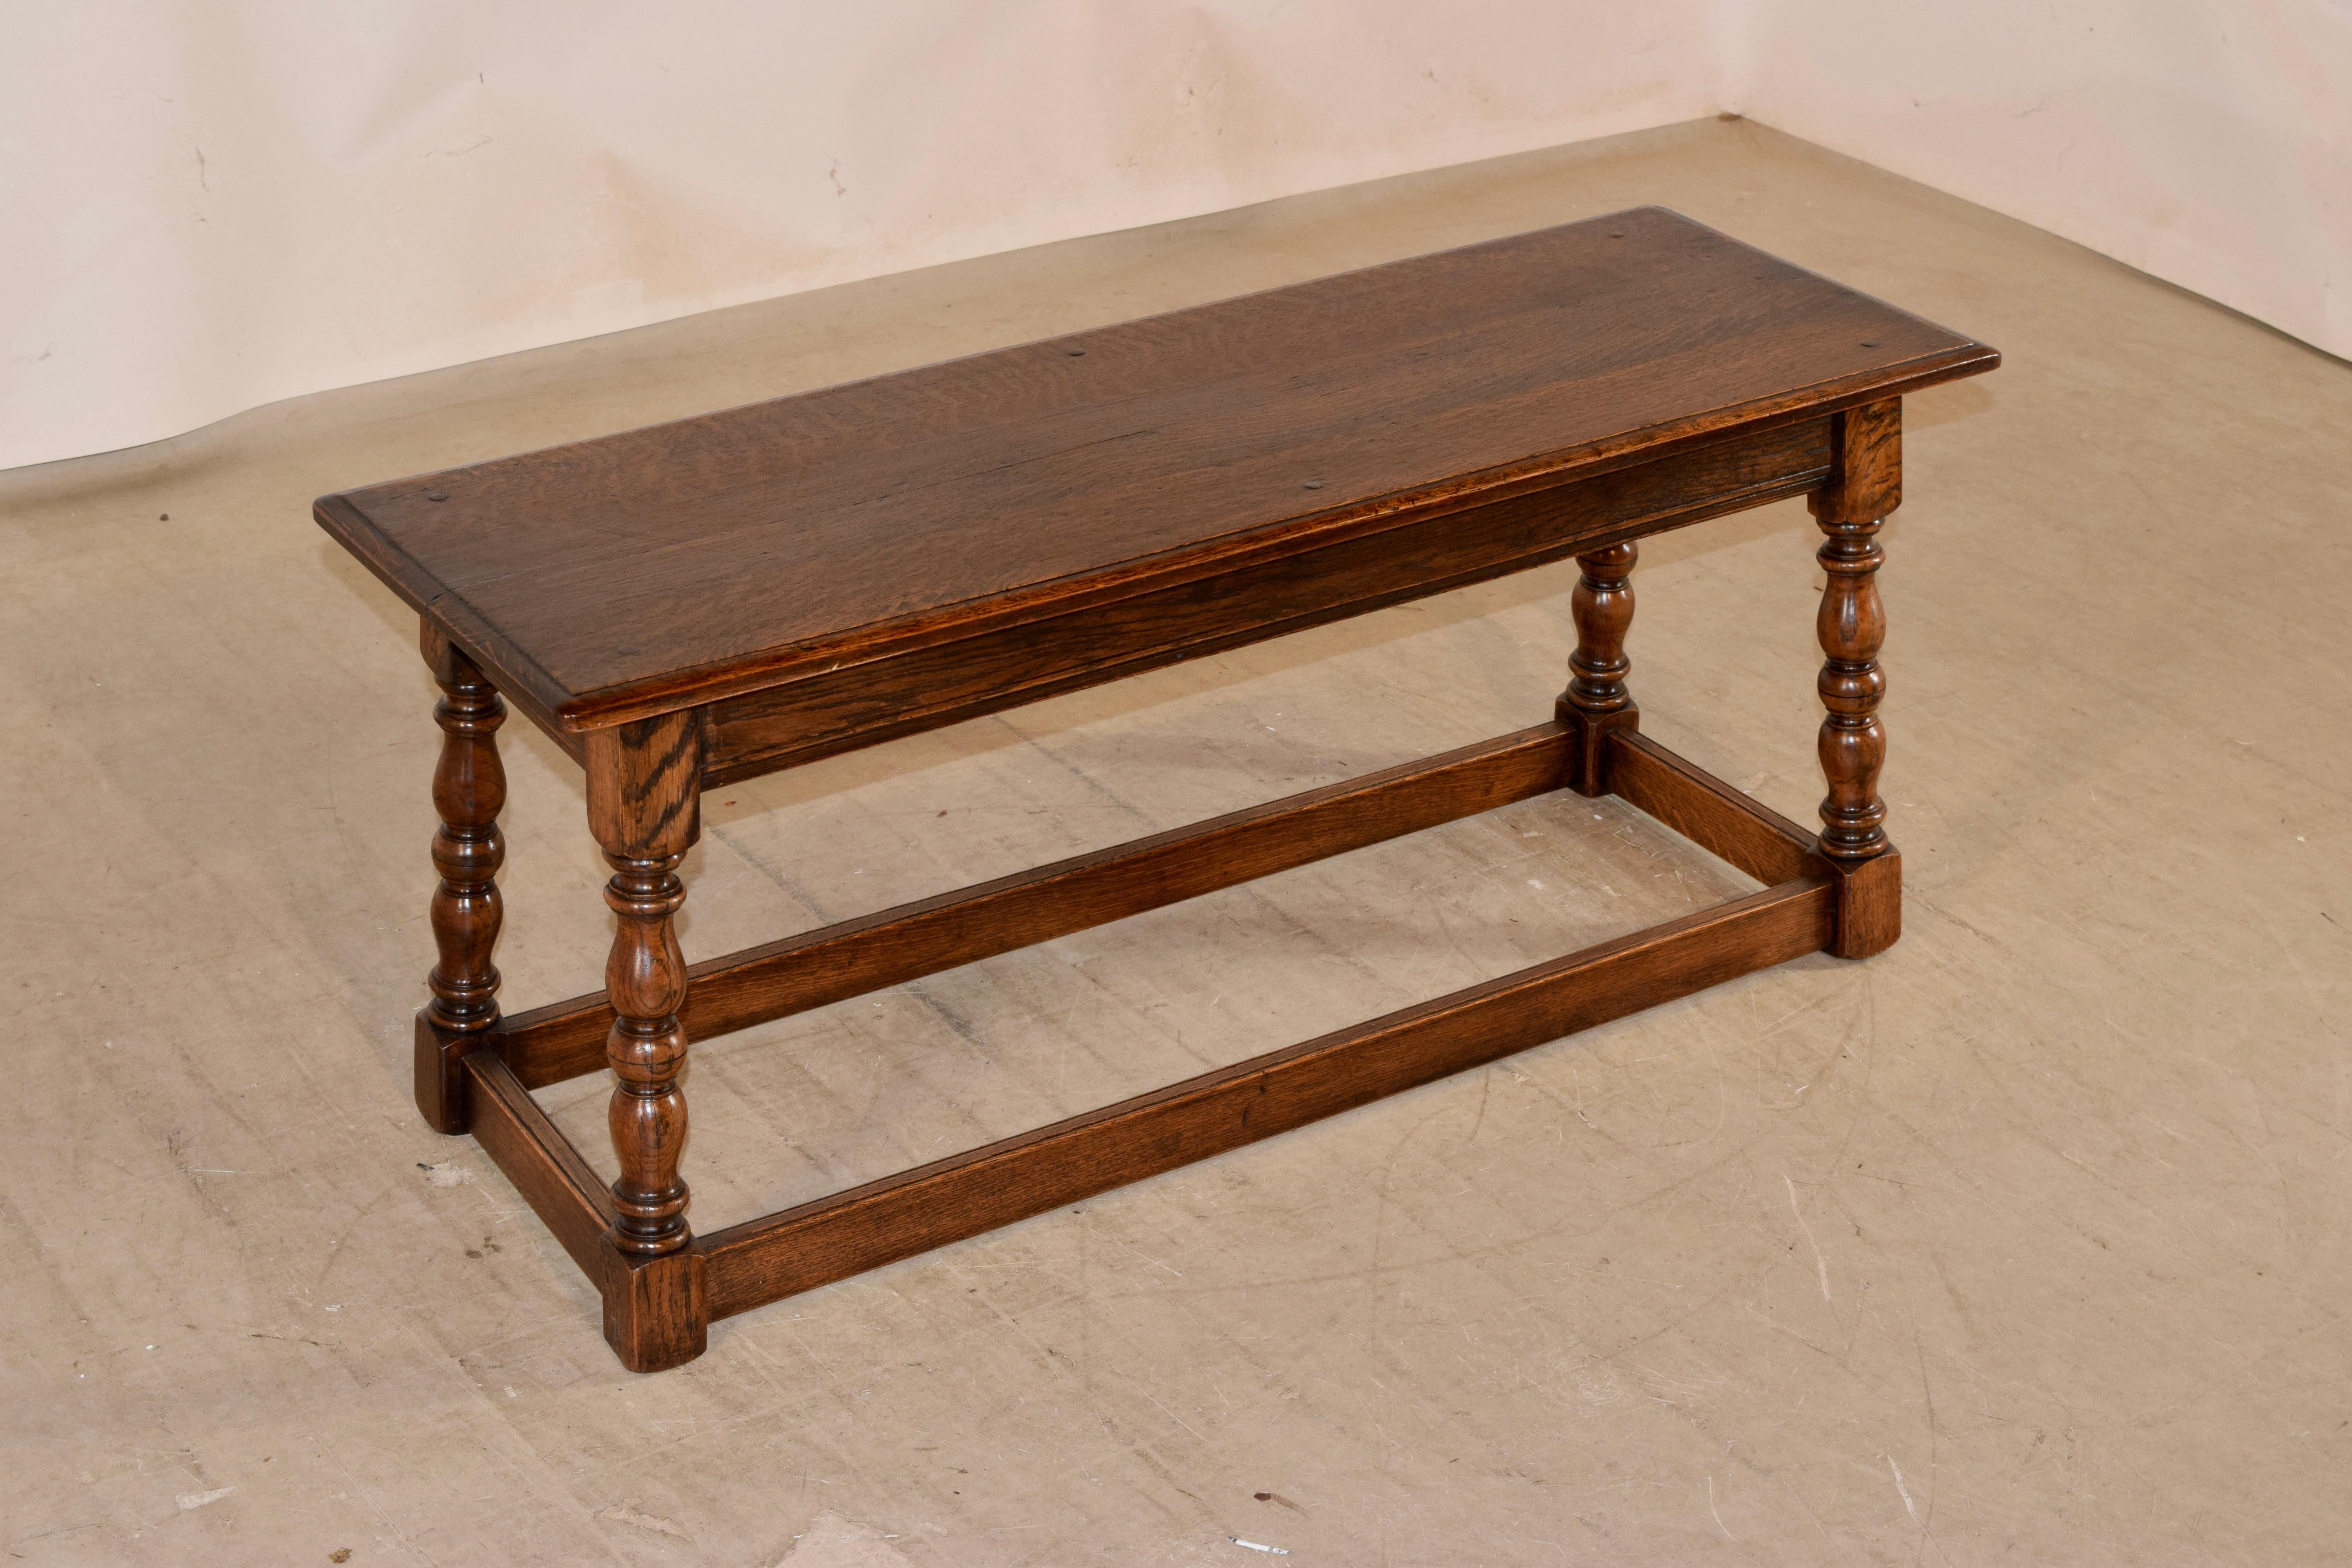 19th century oak joint bench from England with a beveled edge around the top, following down to a simple apron. The piece is supported on hand turned splayed legs, joined by simple stretchers.